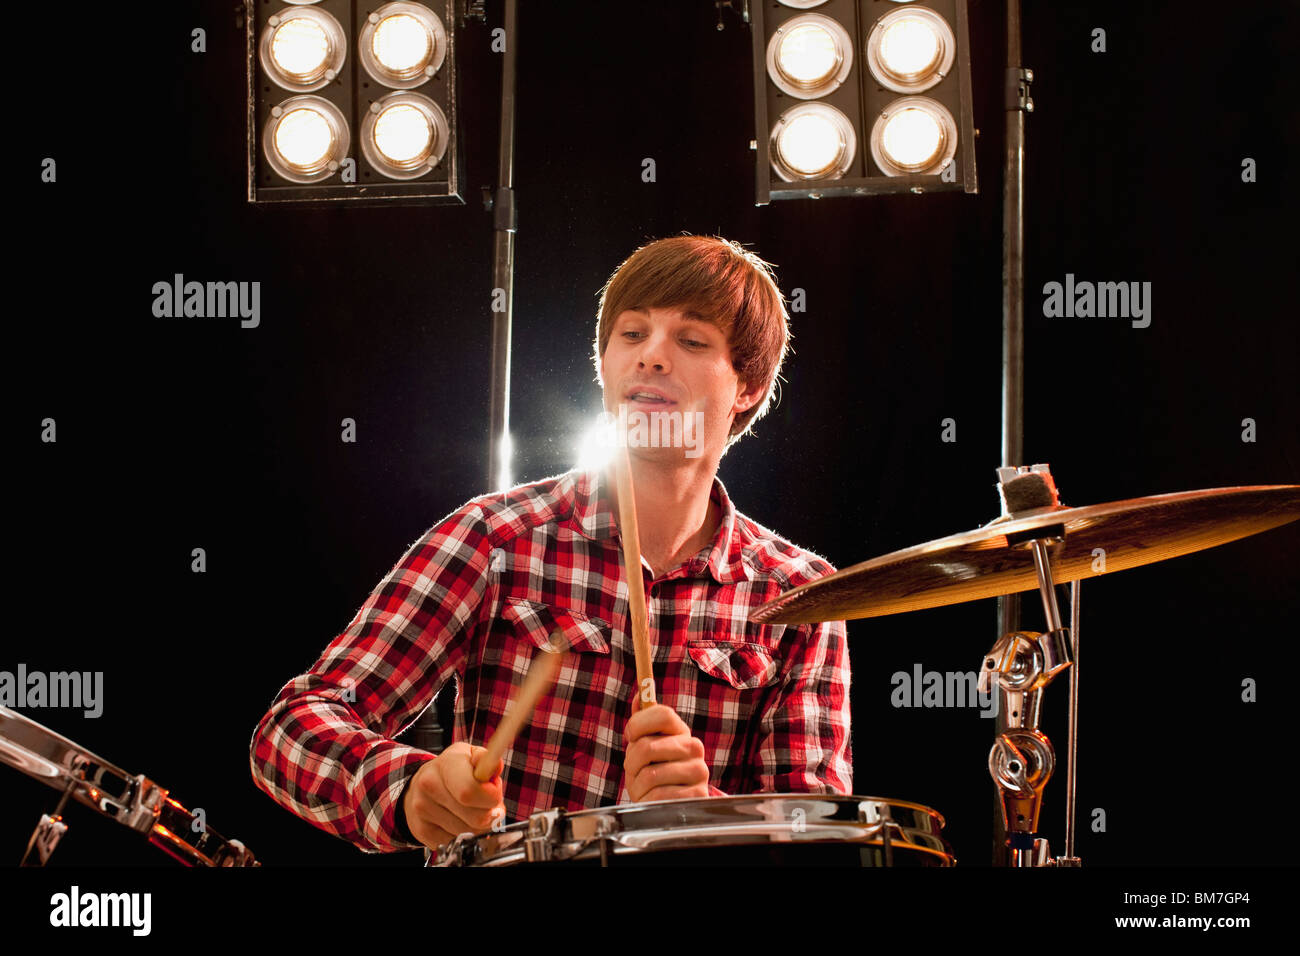 A male drummer performing on stage Stock Photo